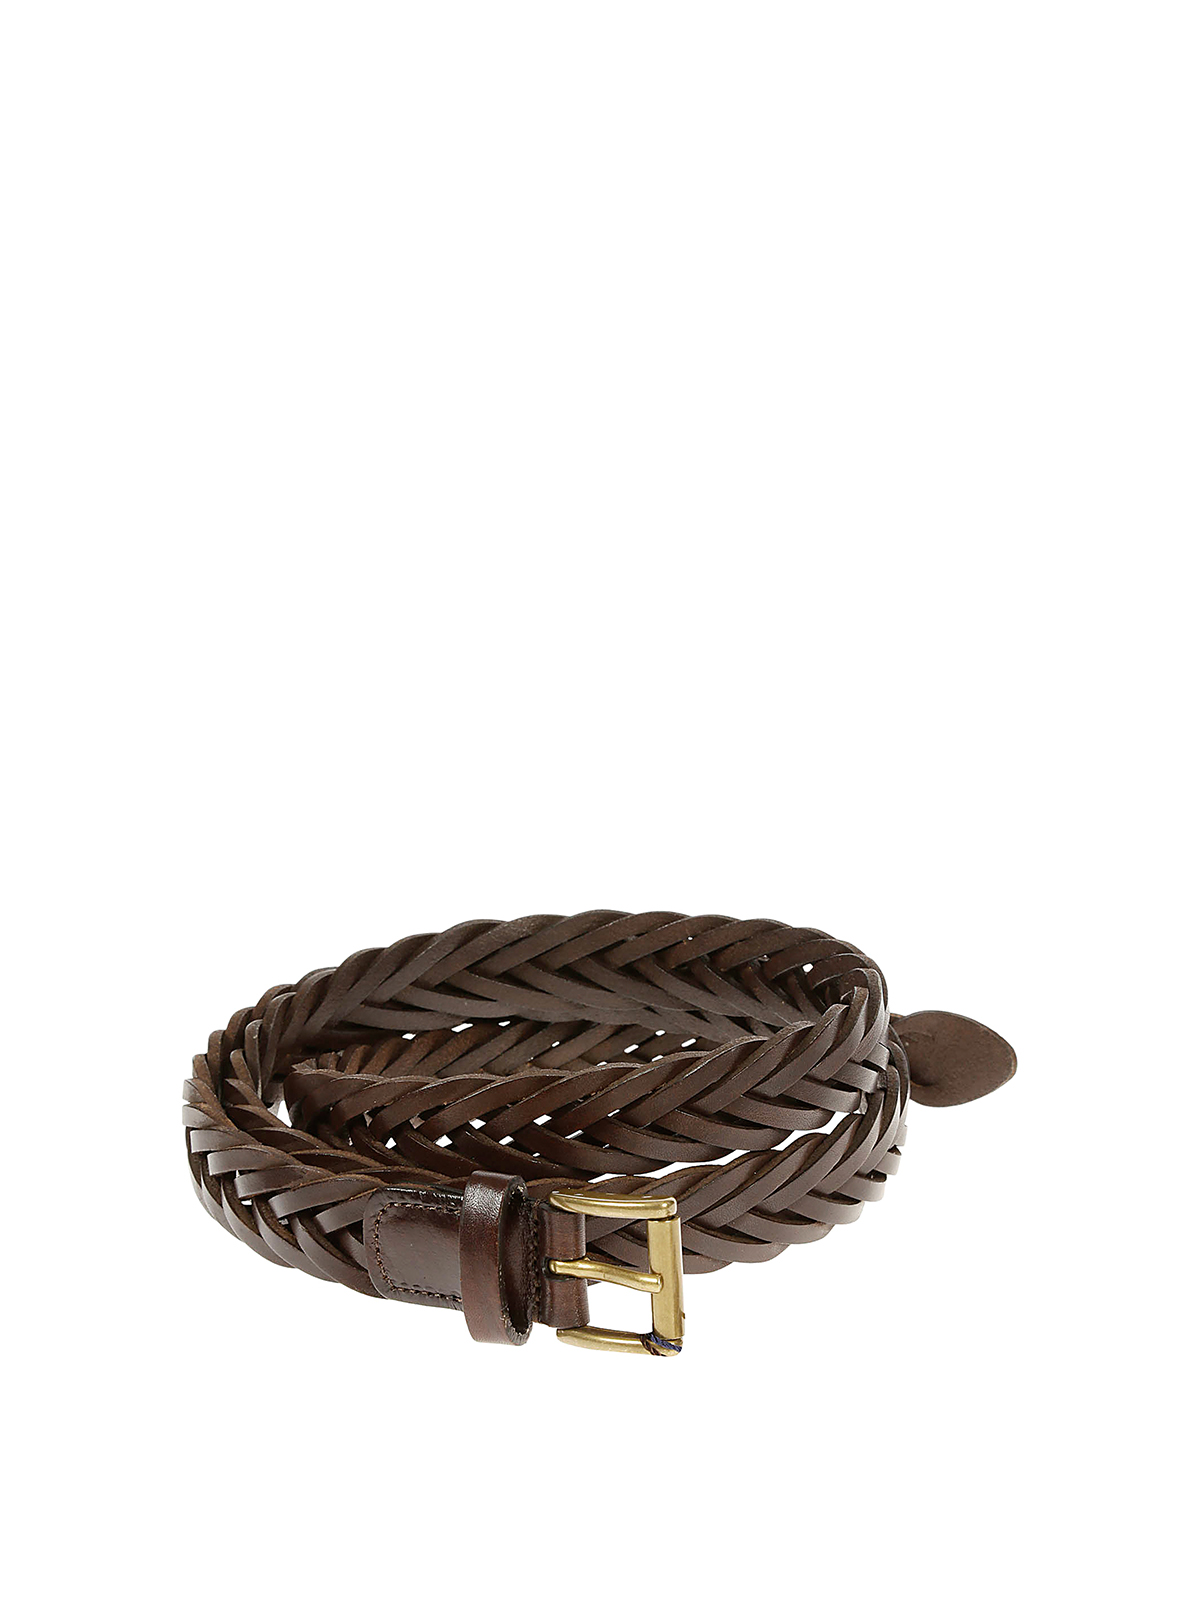 ANDERSON'S Woven leather belt